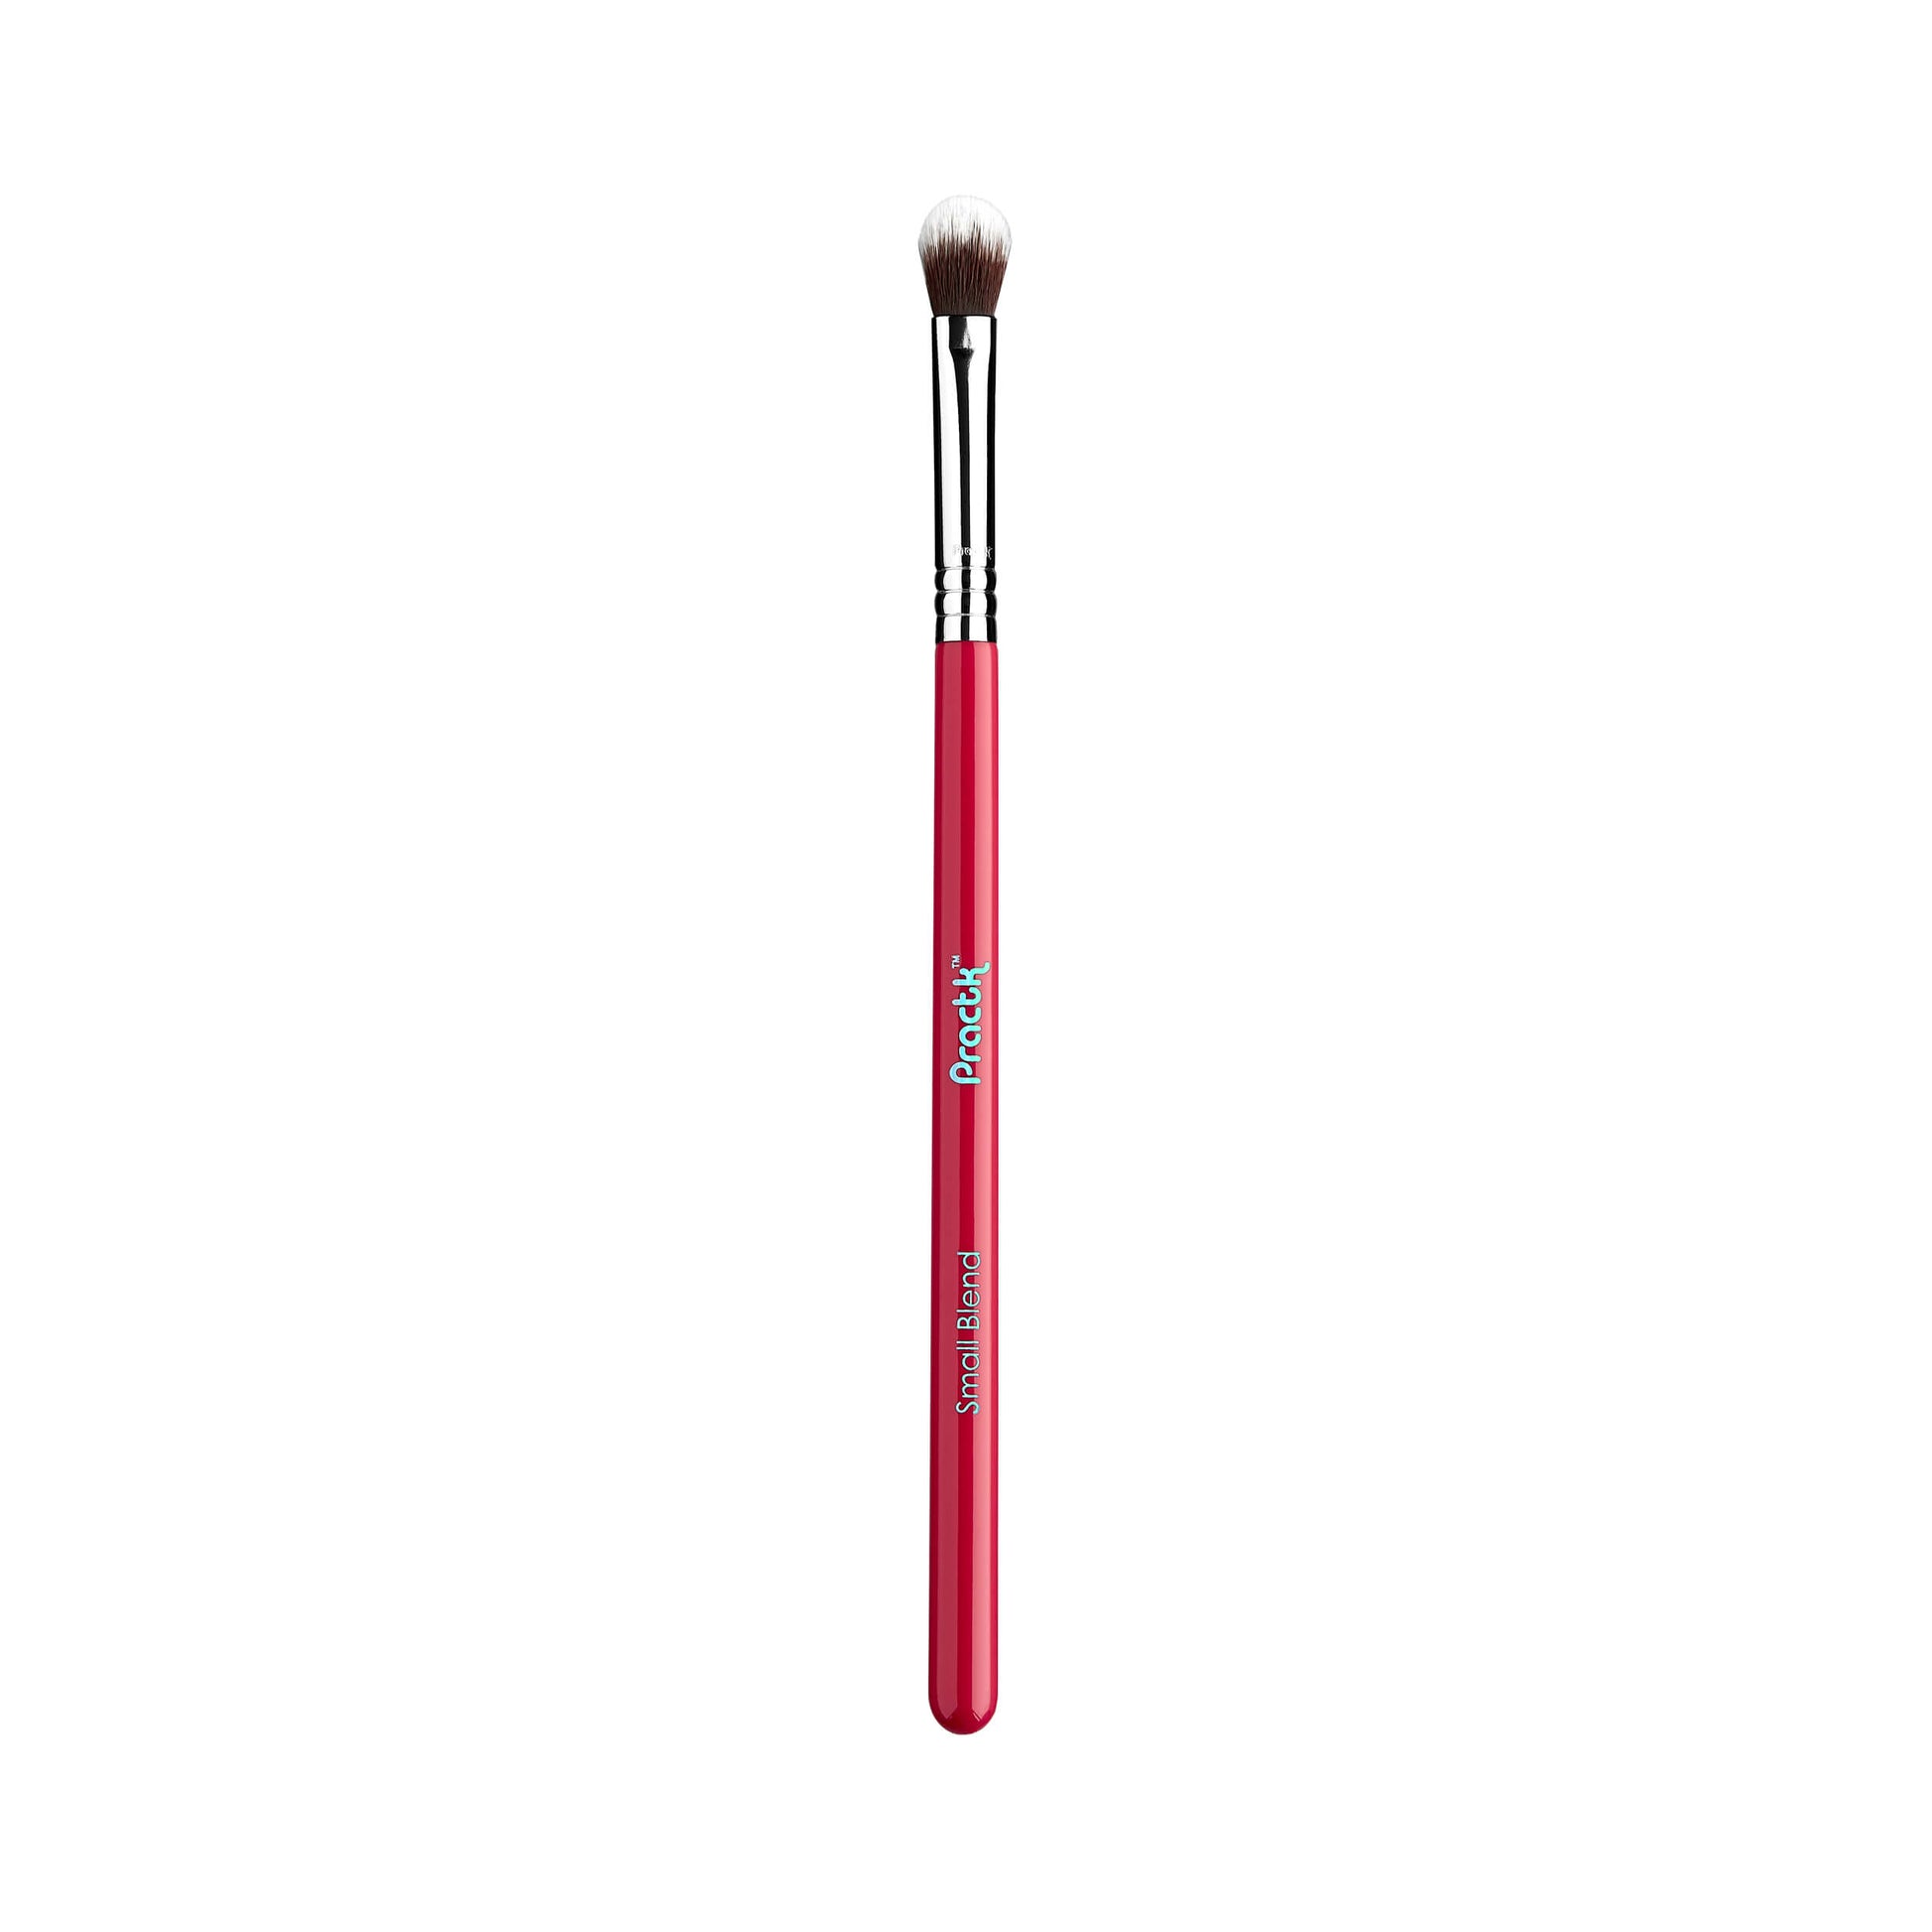 Practk (by Sigma Beauty) Small Blend Brush